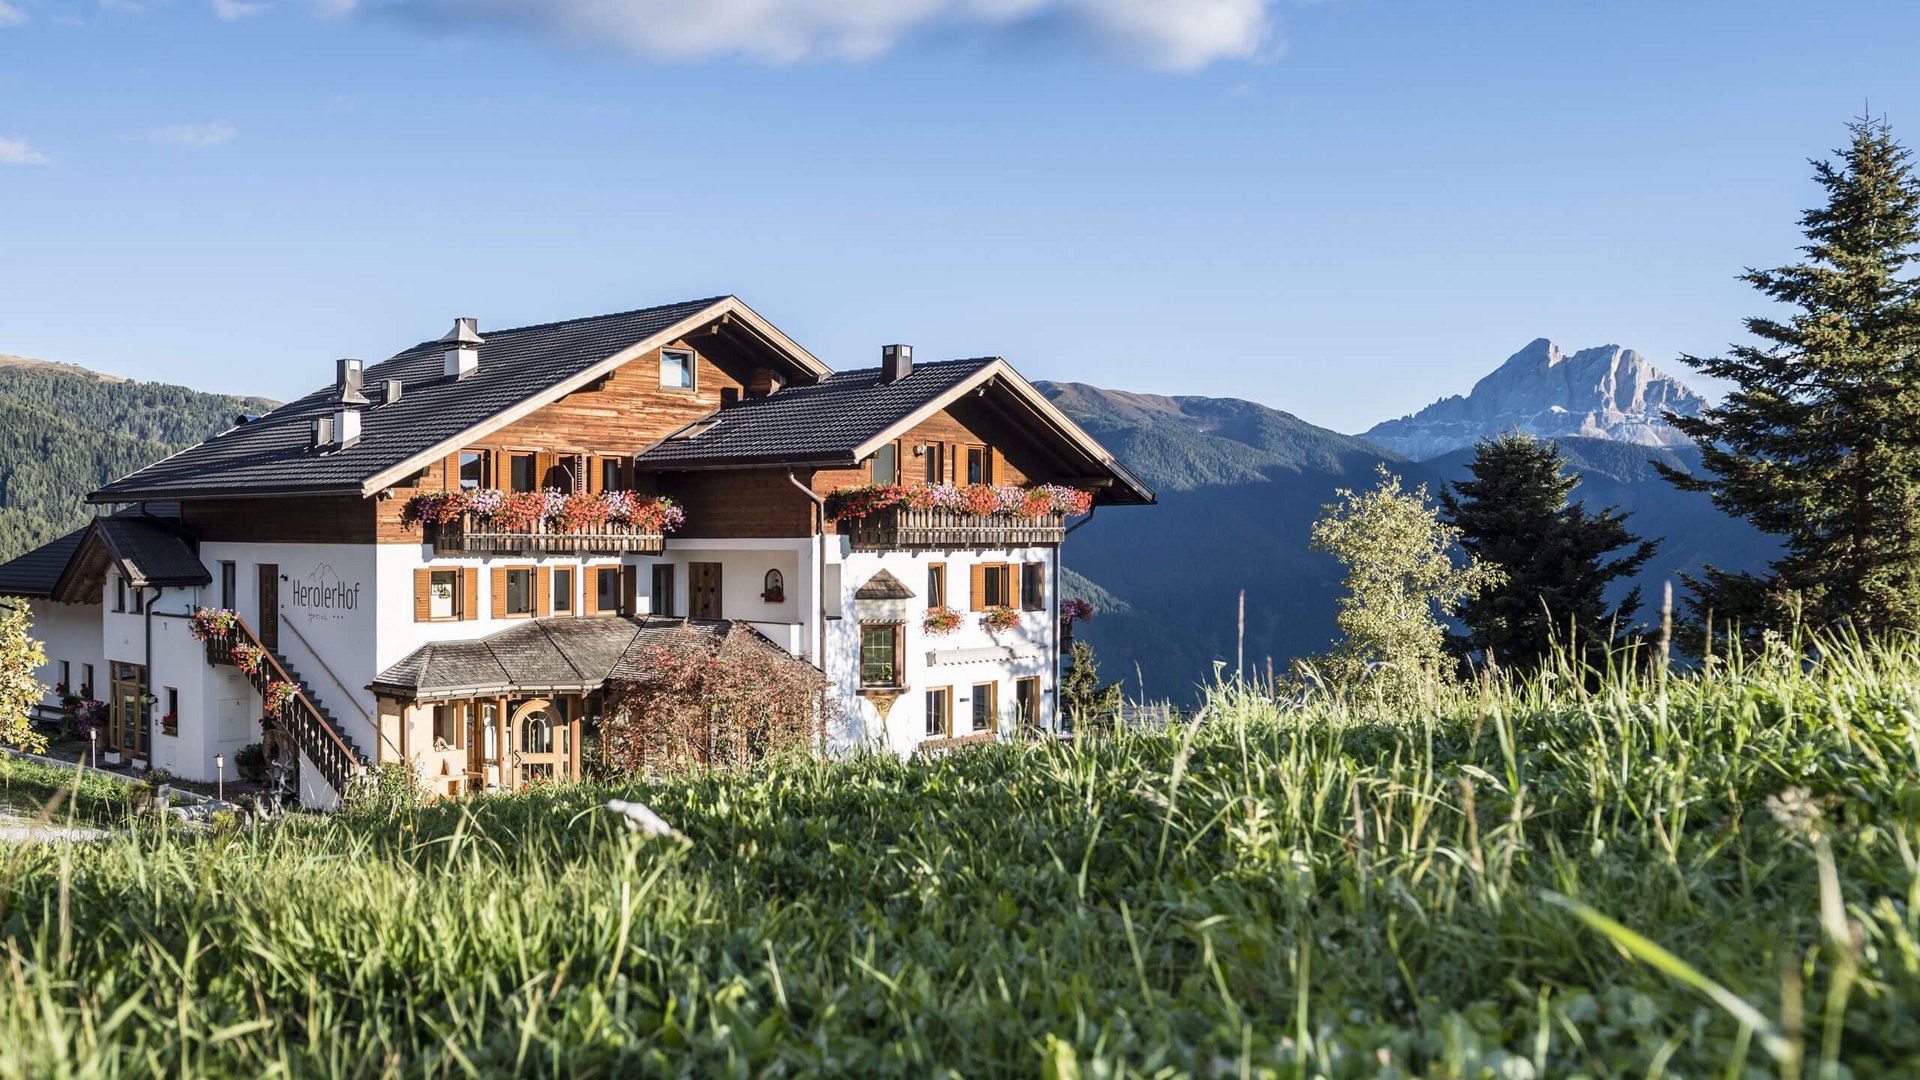 Your hideaway in South Tyrol: it doesn’t get any dreamier than this!